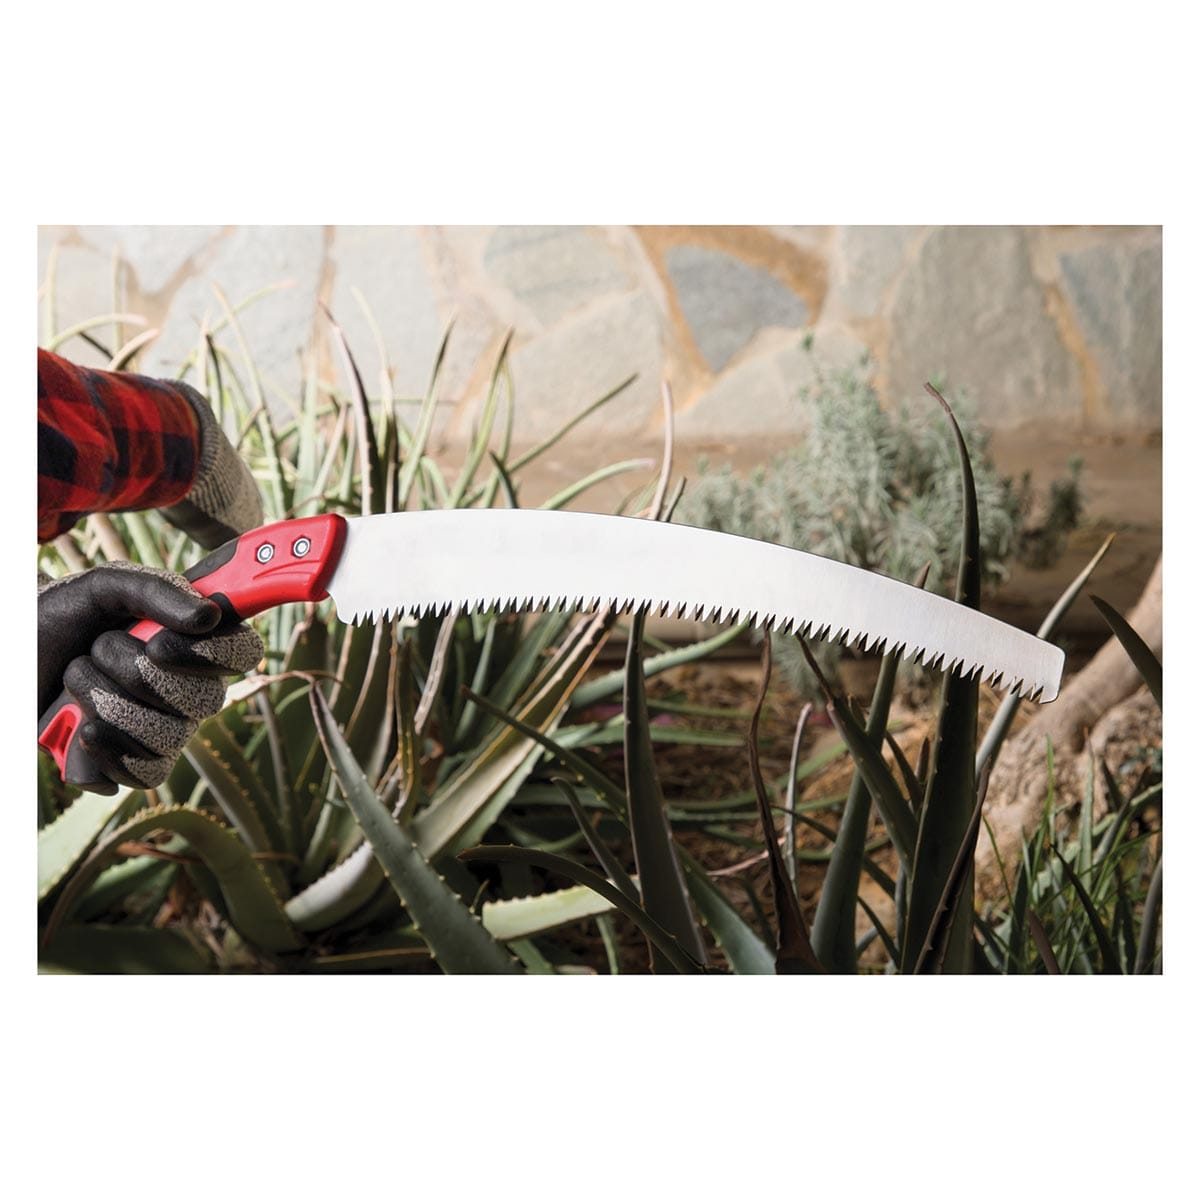 Gemplers Curved Blade Pruning Saw with 13" Blade